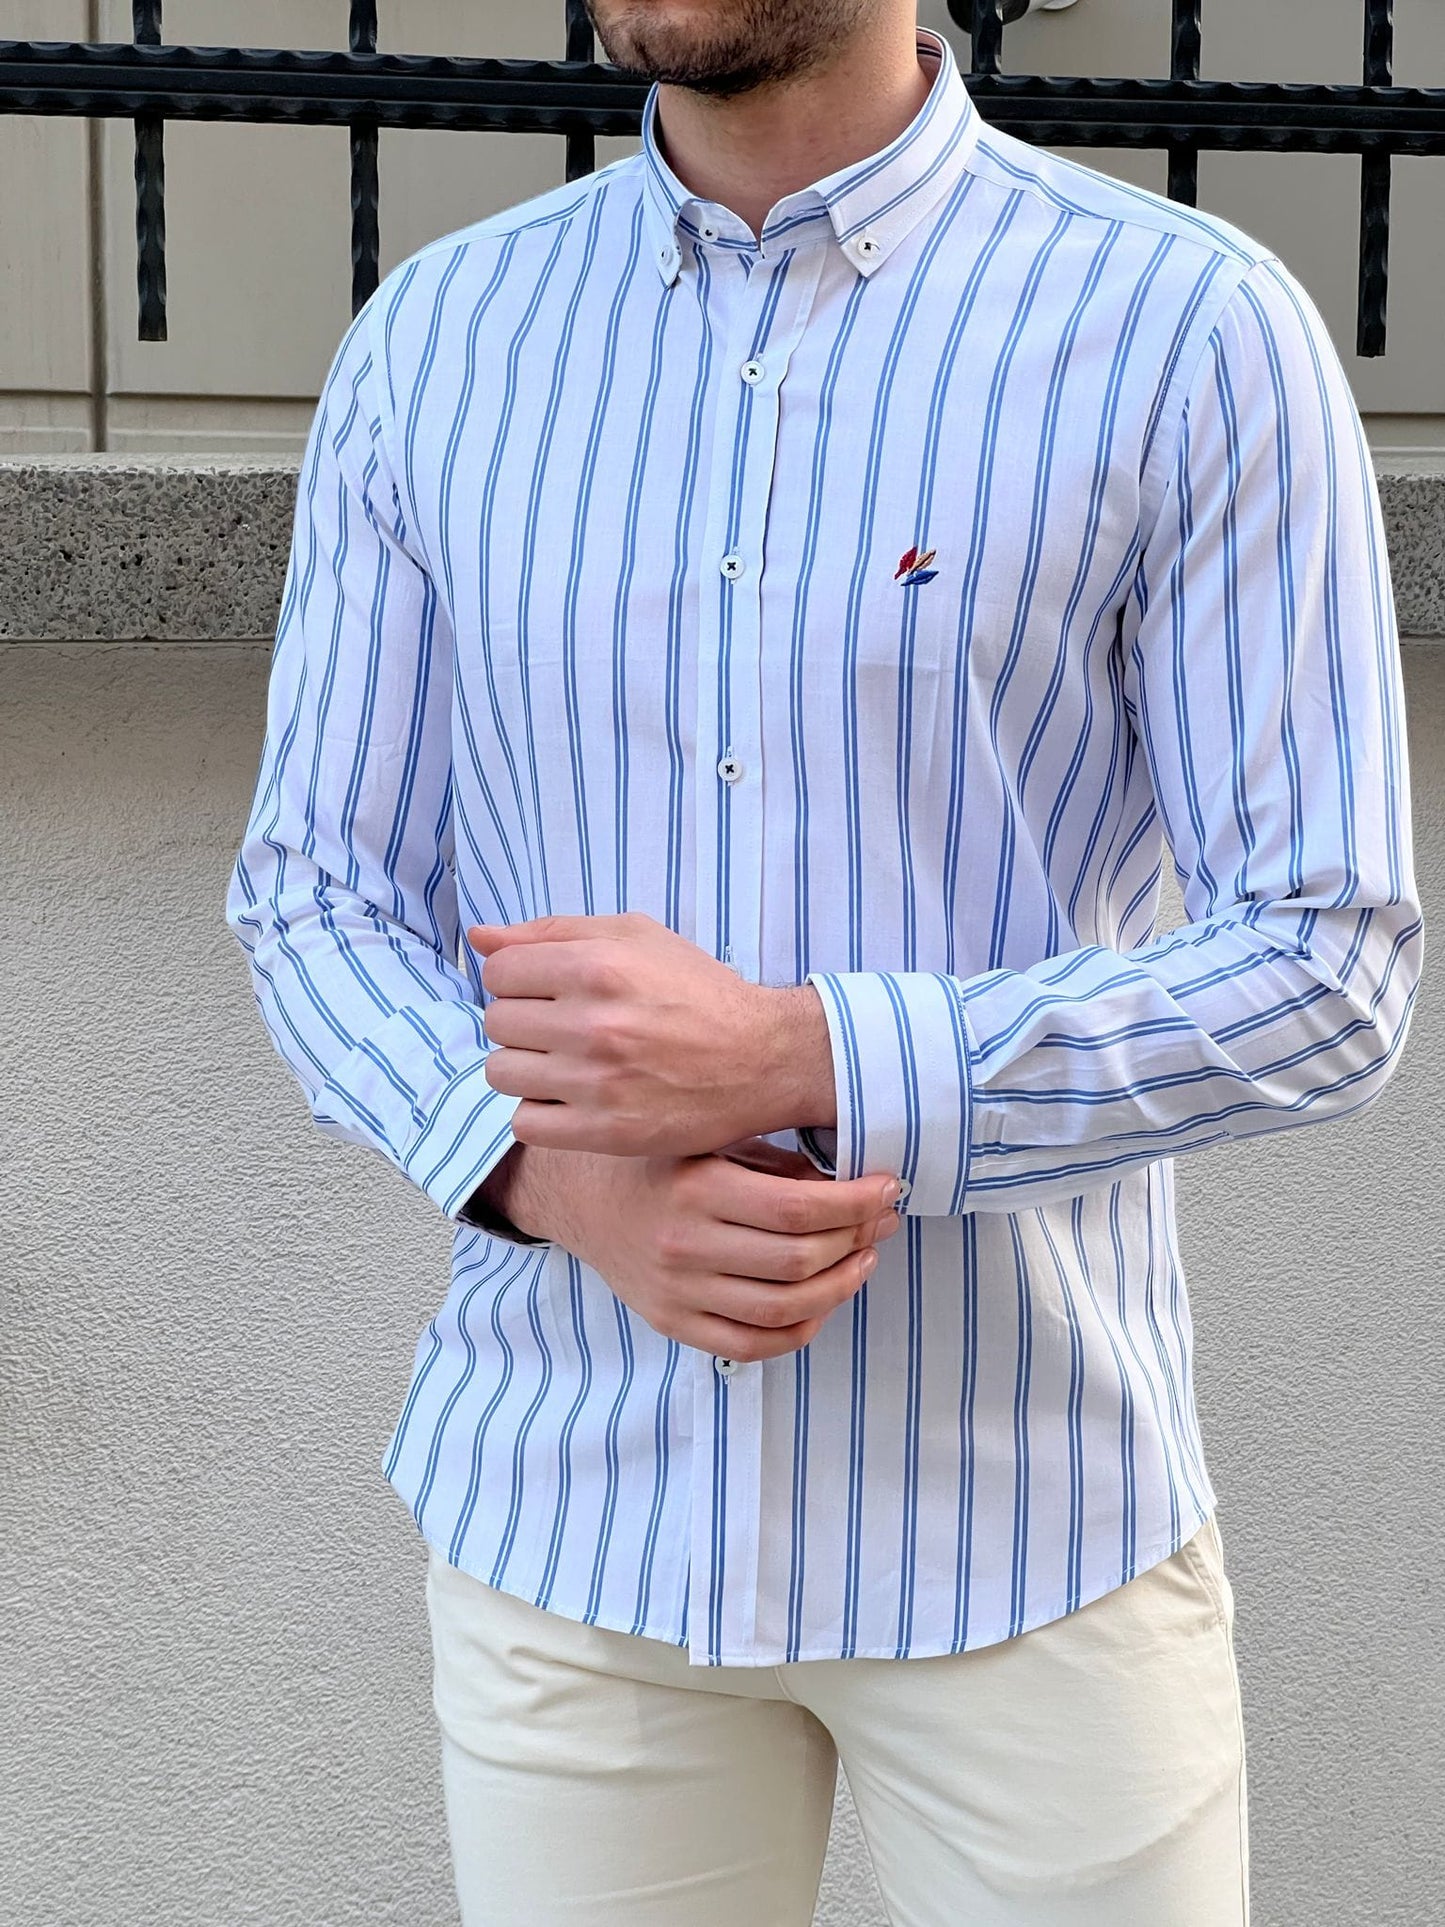 Slim Fit Striped Cotton White & Blue Shirt - OUTFITLIFT